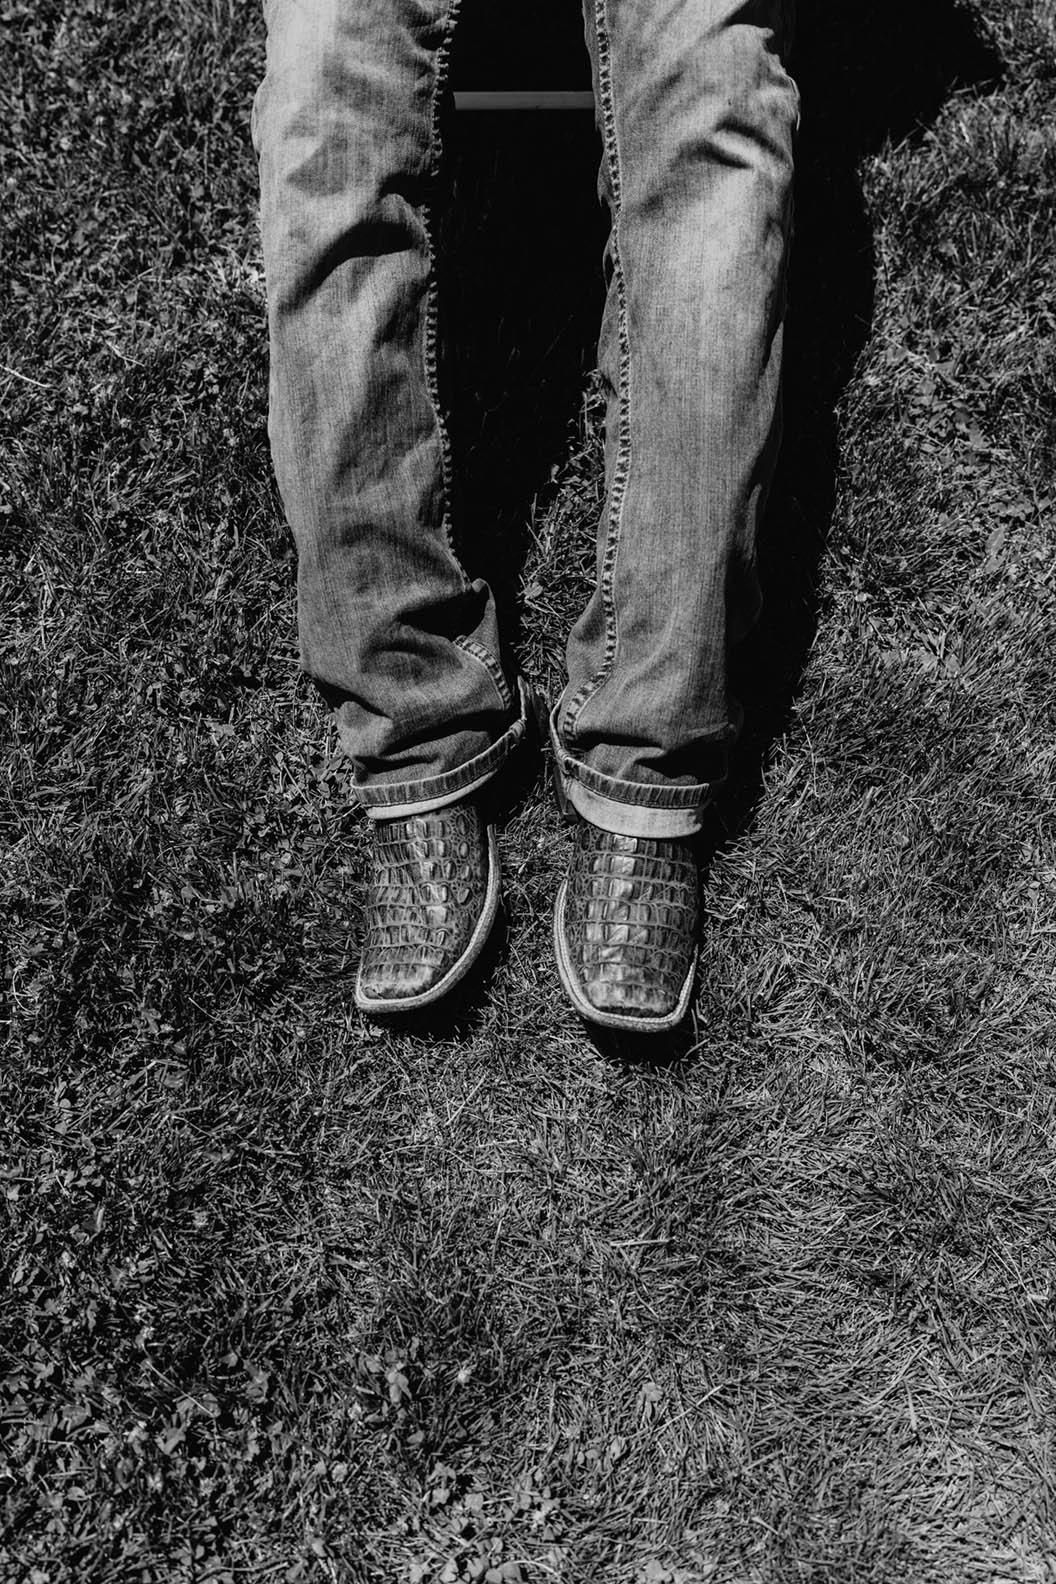 Black and white image of legs wearing jeans and cowboy boots against grass/dirt